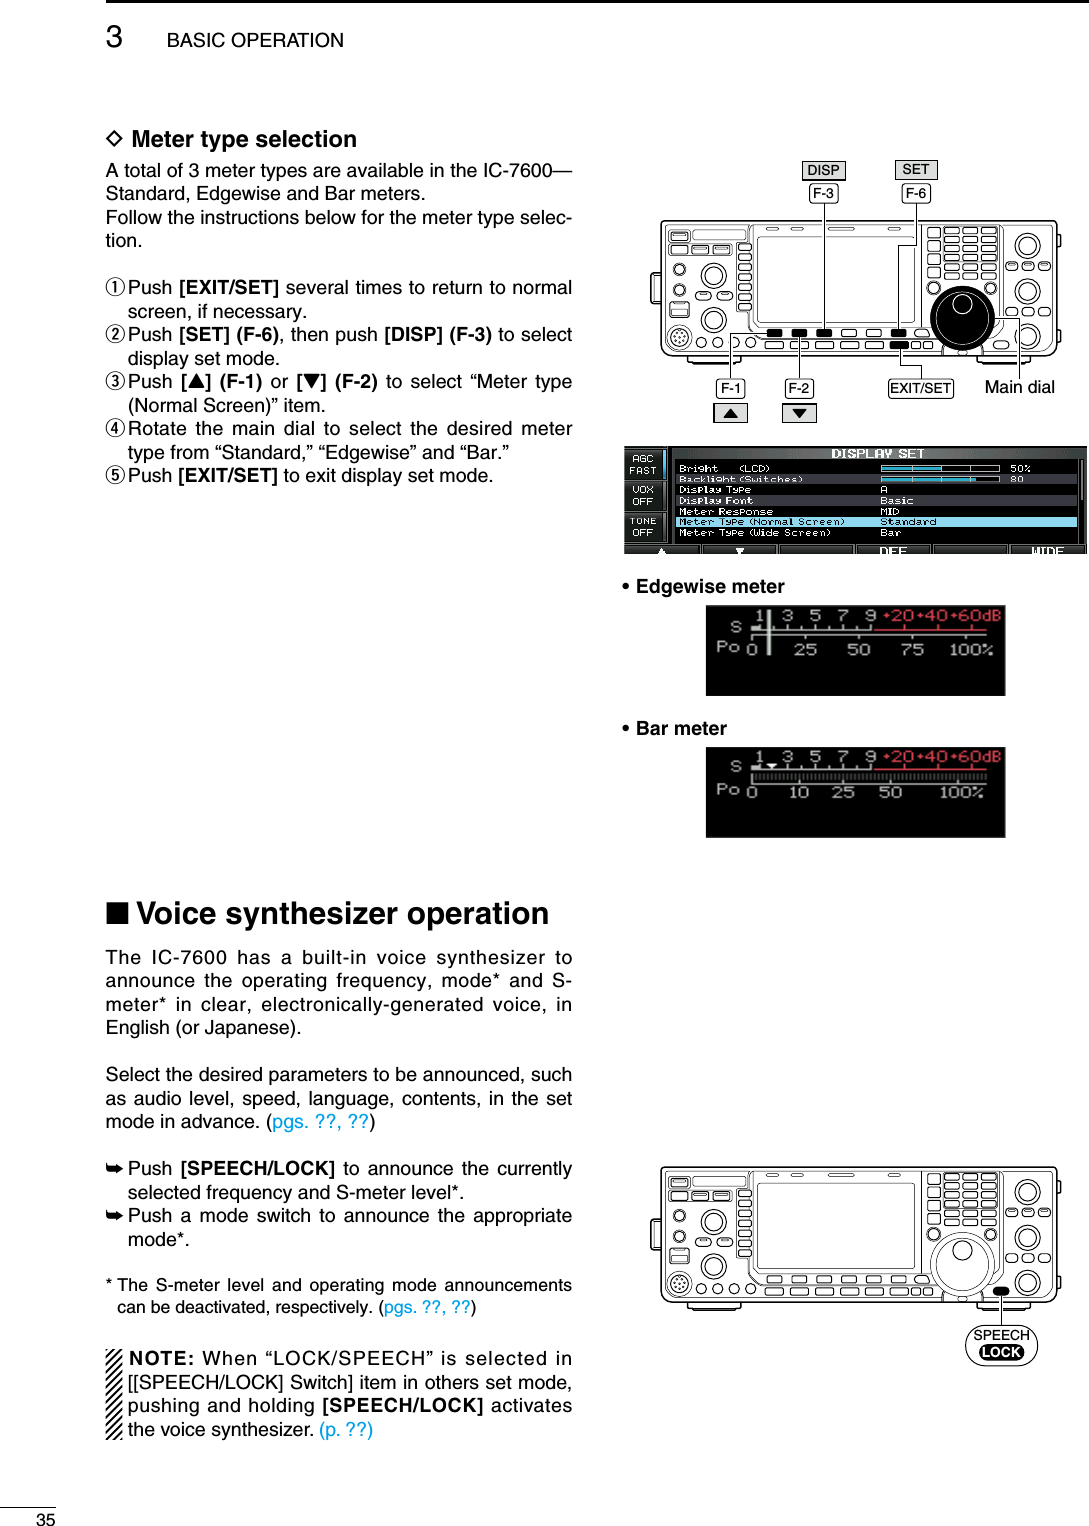 D Meter type selectionA total of 3 meter types are available in the IC-7600— Standard, Edgewise and Bar meters. Follow the instructions below for the meter type selec-tion.q  Push [EXIT/SET] several times to return to normal screen, if necessary.w  Push [SET] (F-6), then push [DISP] (F-3) to select display set mode.e  Push  [Y] (F-1) or  [Z] (F-2) to select “Meter type (Normal Screen)” item.r  Rotate the main dial to select the desired meter type from “Standard,” “Edgewise” and “Bar.”t Push  [EXIT/SET] to exit display set mode.N Voice synthesizer operationThe IC-7600 has a built-in voice synthesizer to announce the operating frequency, mode* and S-meter* in clear, electronically-generated voice, in English (or Japanese).Select the desired parameters to be announced, such as audio level, speed, language, contents, in the set mode in advance. (pgs. ??, ??)±  Push  [SPEECH/LOCK] to announce the currently selected frequency and S-meter level*.±  Push a mode switch to announce the appropriate mode*.*  The S-meter level and operating mode announcements can be deactivated, respectively. (pgs. ??, ??)NOTE: When “LOCK/SPEECH” is selected in [[SPEECH/LOCK] Switch] item in others set mode, pushing and holding [SPEECH/LOCK] activates the voice synthesizer. (p. ??)Main dialF-1 F-2F-6EXIT/SETSETF-3DISP• Edgewise meter• Bar meterSPEECHLOCK353BASIC OPERATION